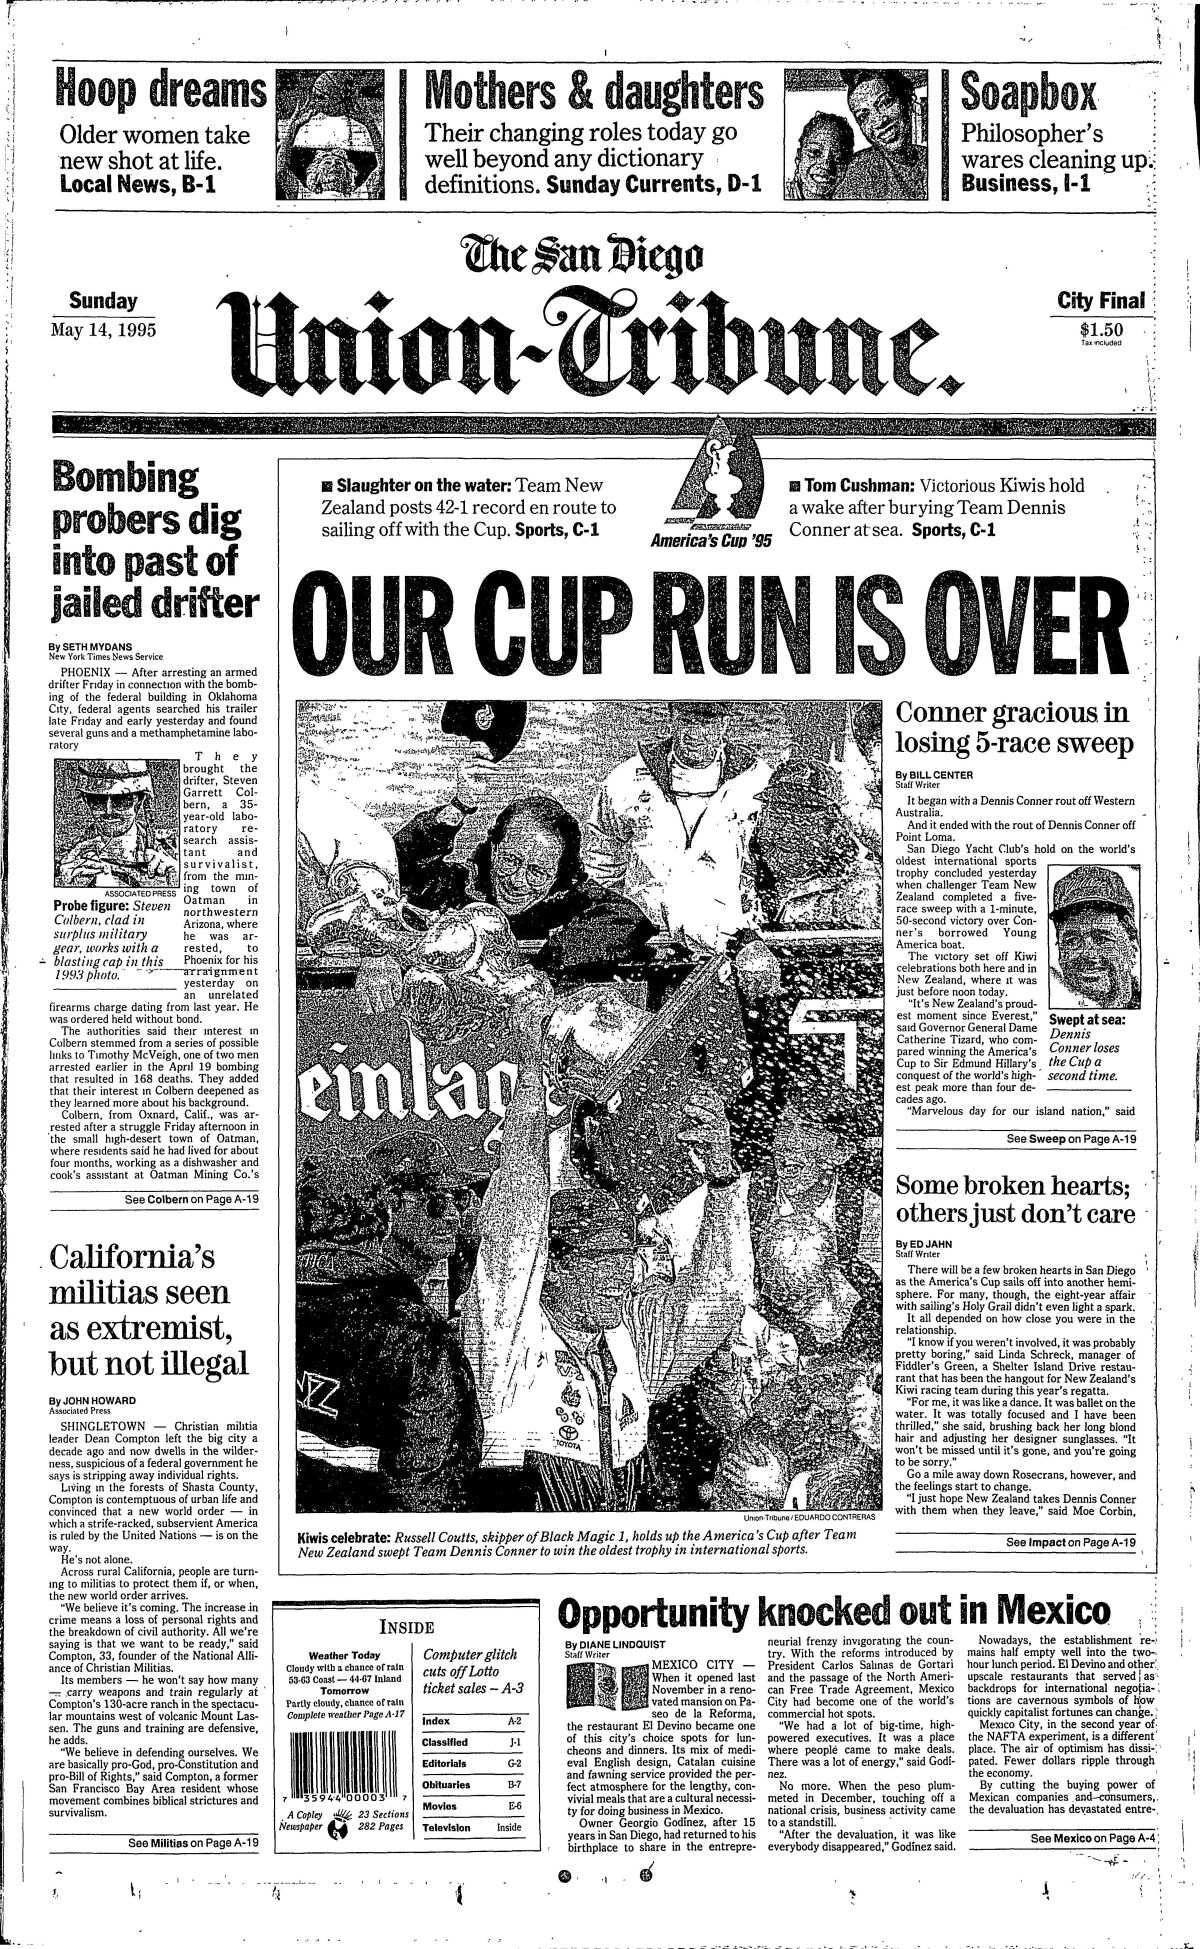 "Our Cup Run is Over," front page of The San Diego Union-Tribune from Sunday, May 14, 1995.